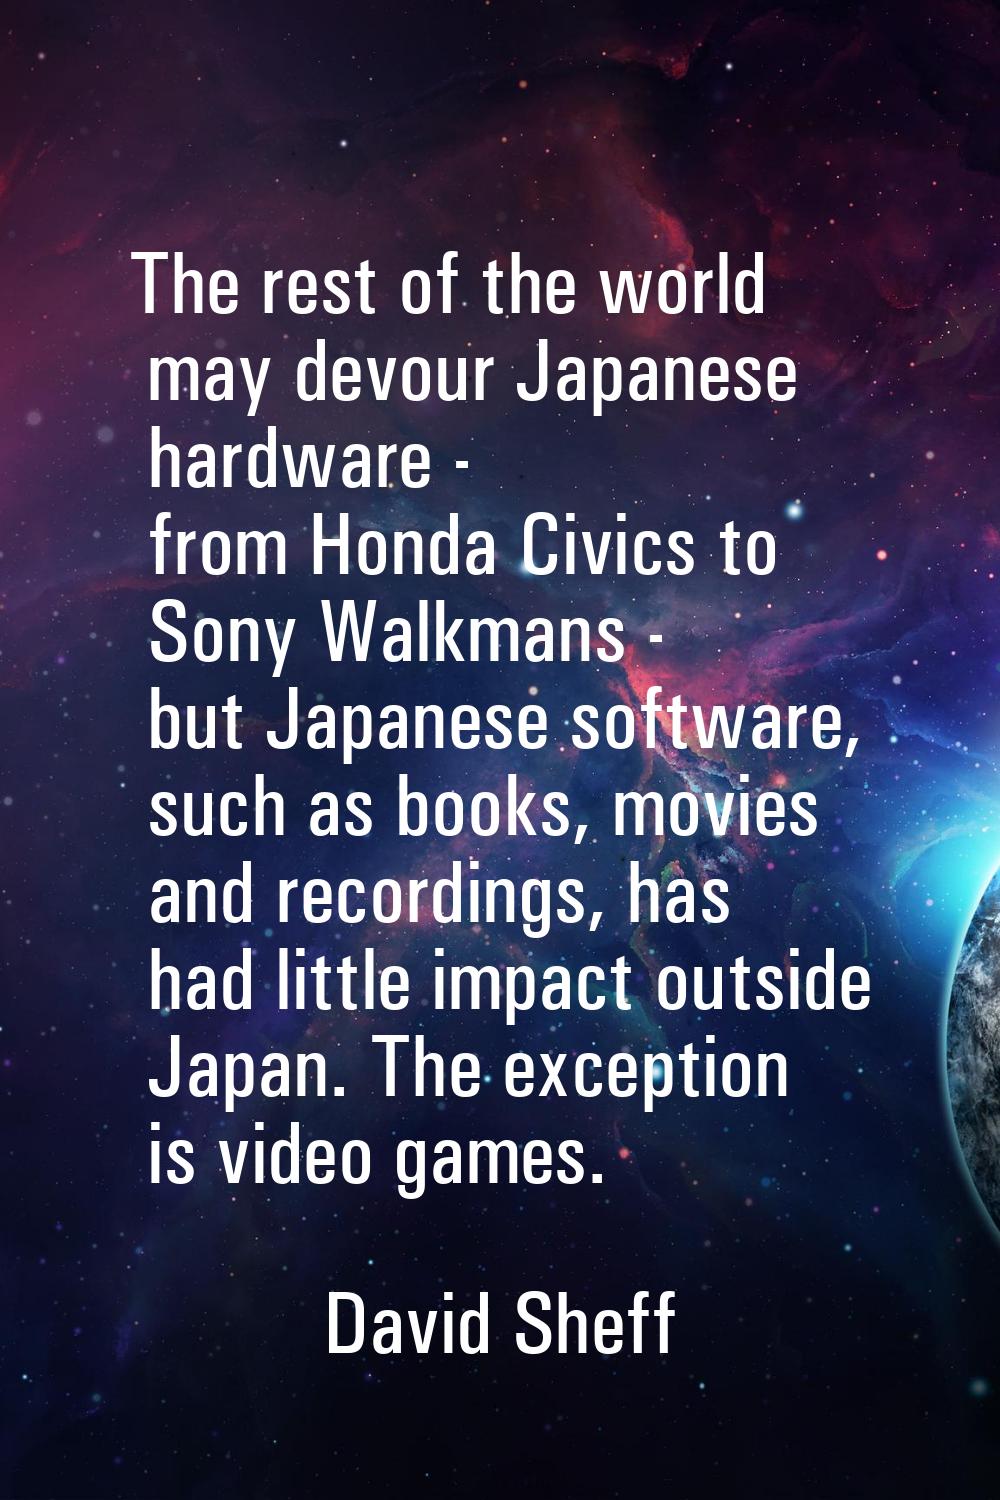 The rest of the world may devour Japanese hardware - from Honda Civics to Sony Walkmans - but Japan